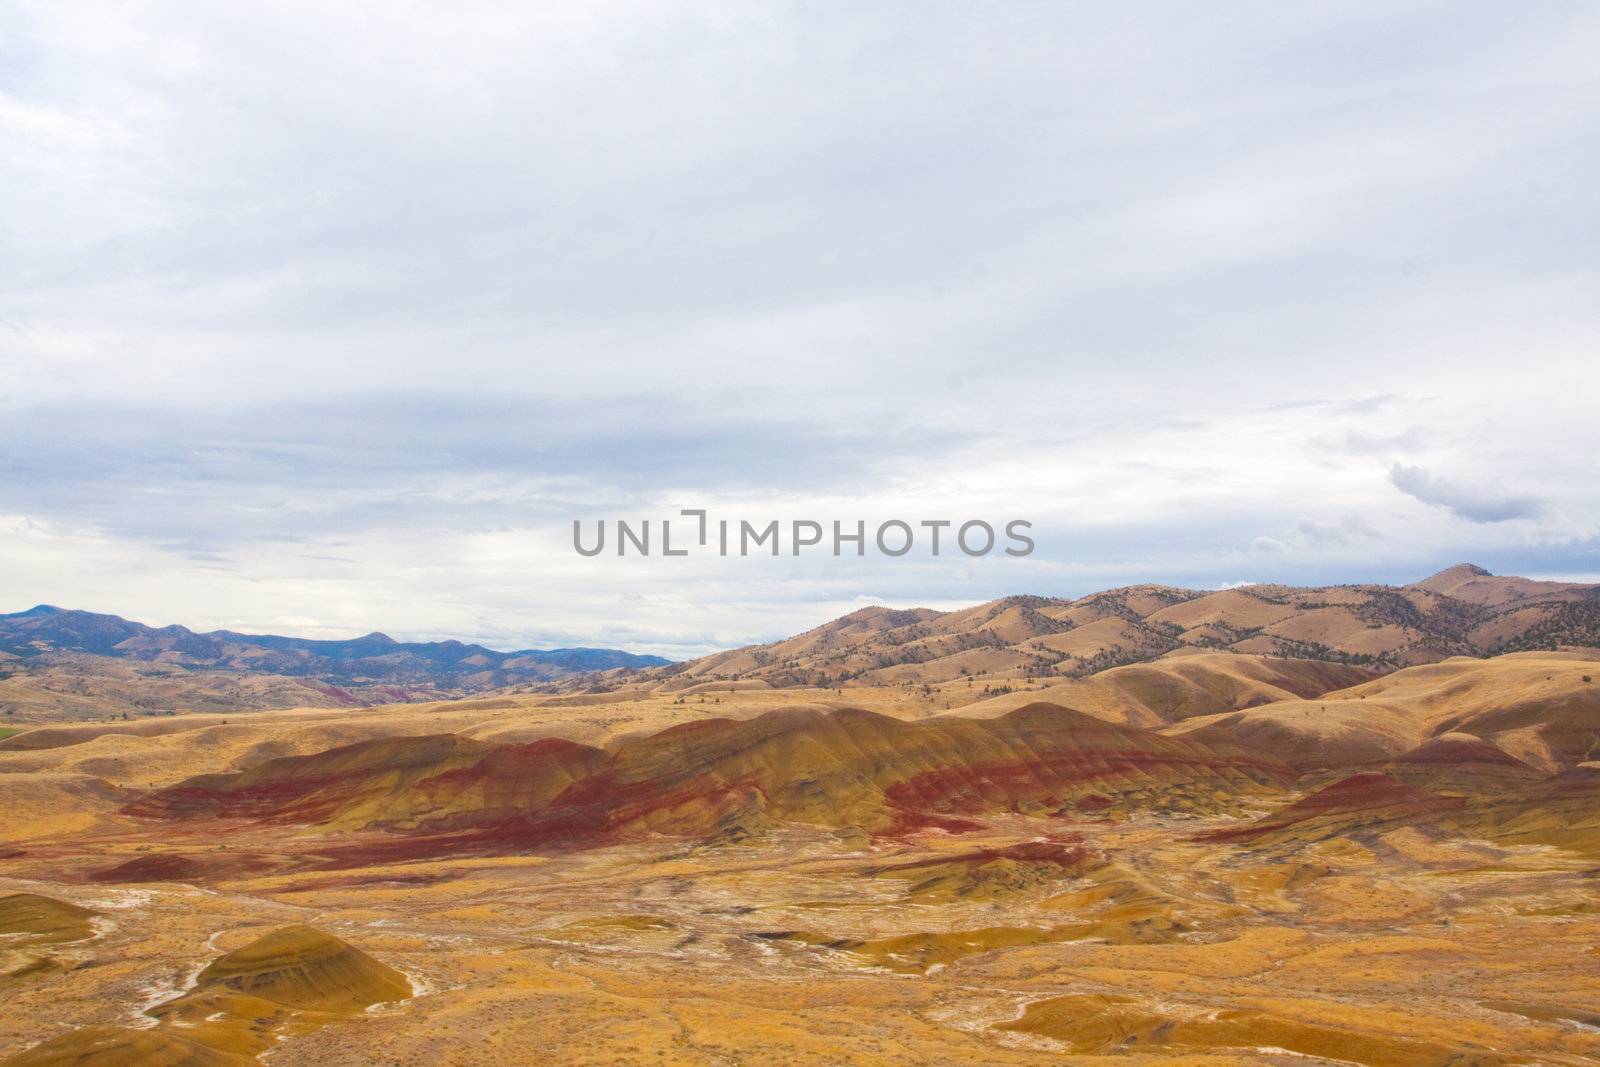 Painted Hills by joshuaraineyphotography